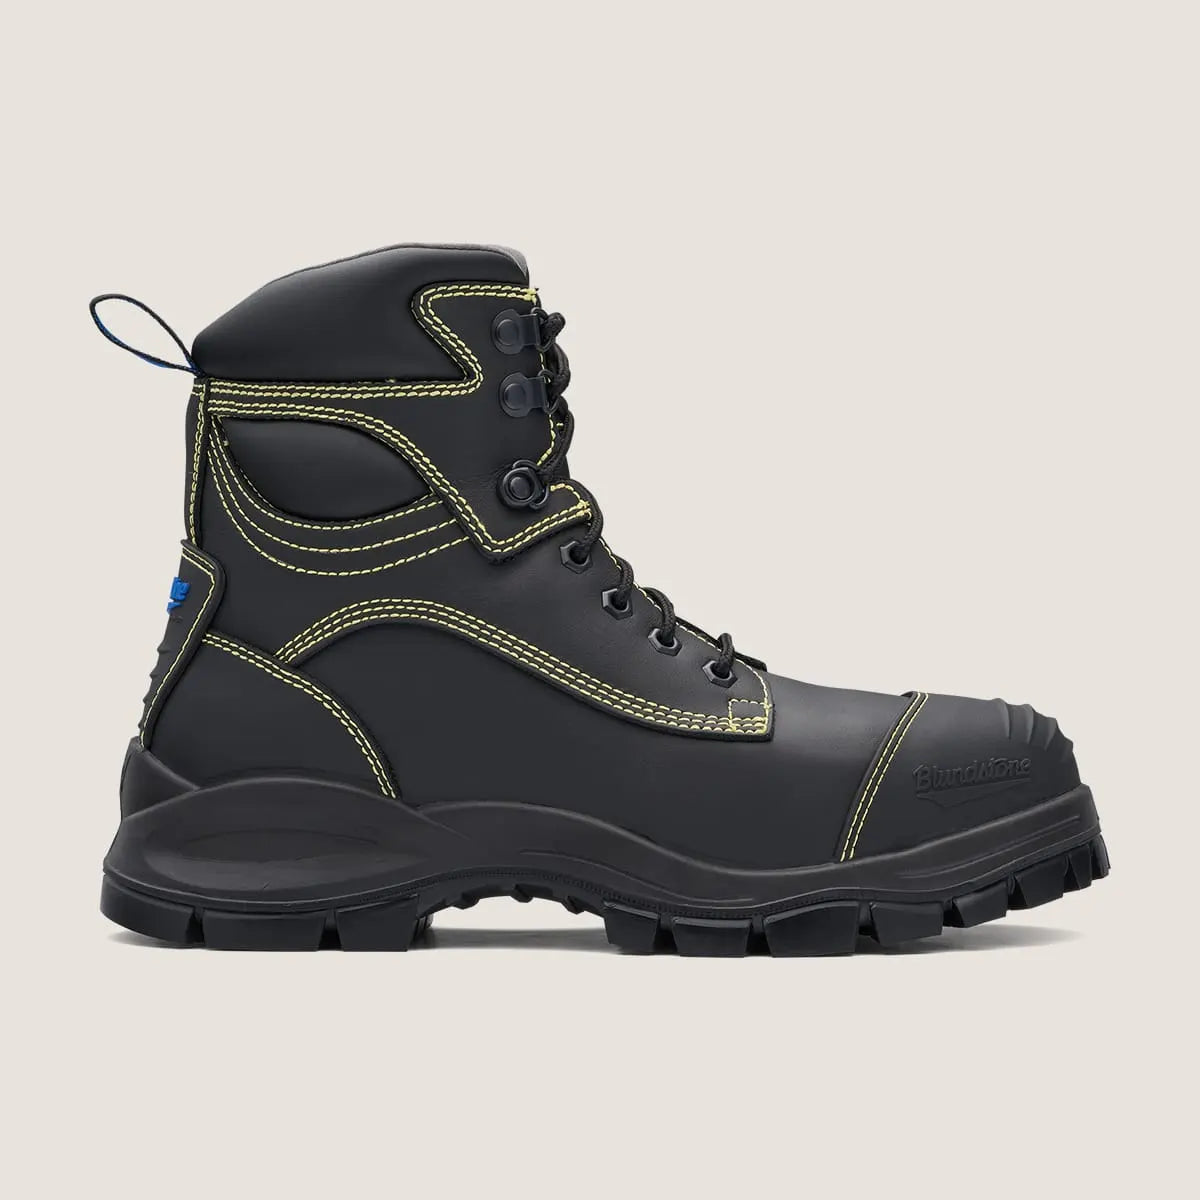 BLUNDSTONE 994 METGUARD LACE UP SAFETY BOOT-BLACK